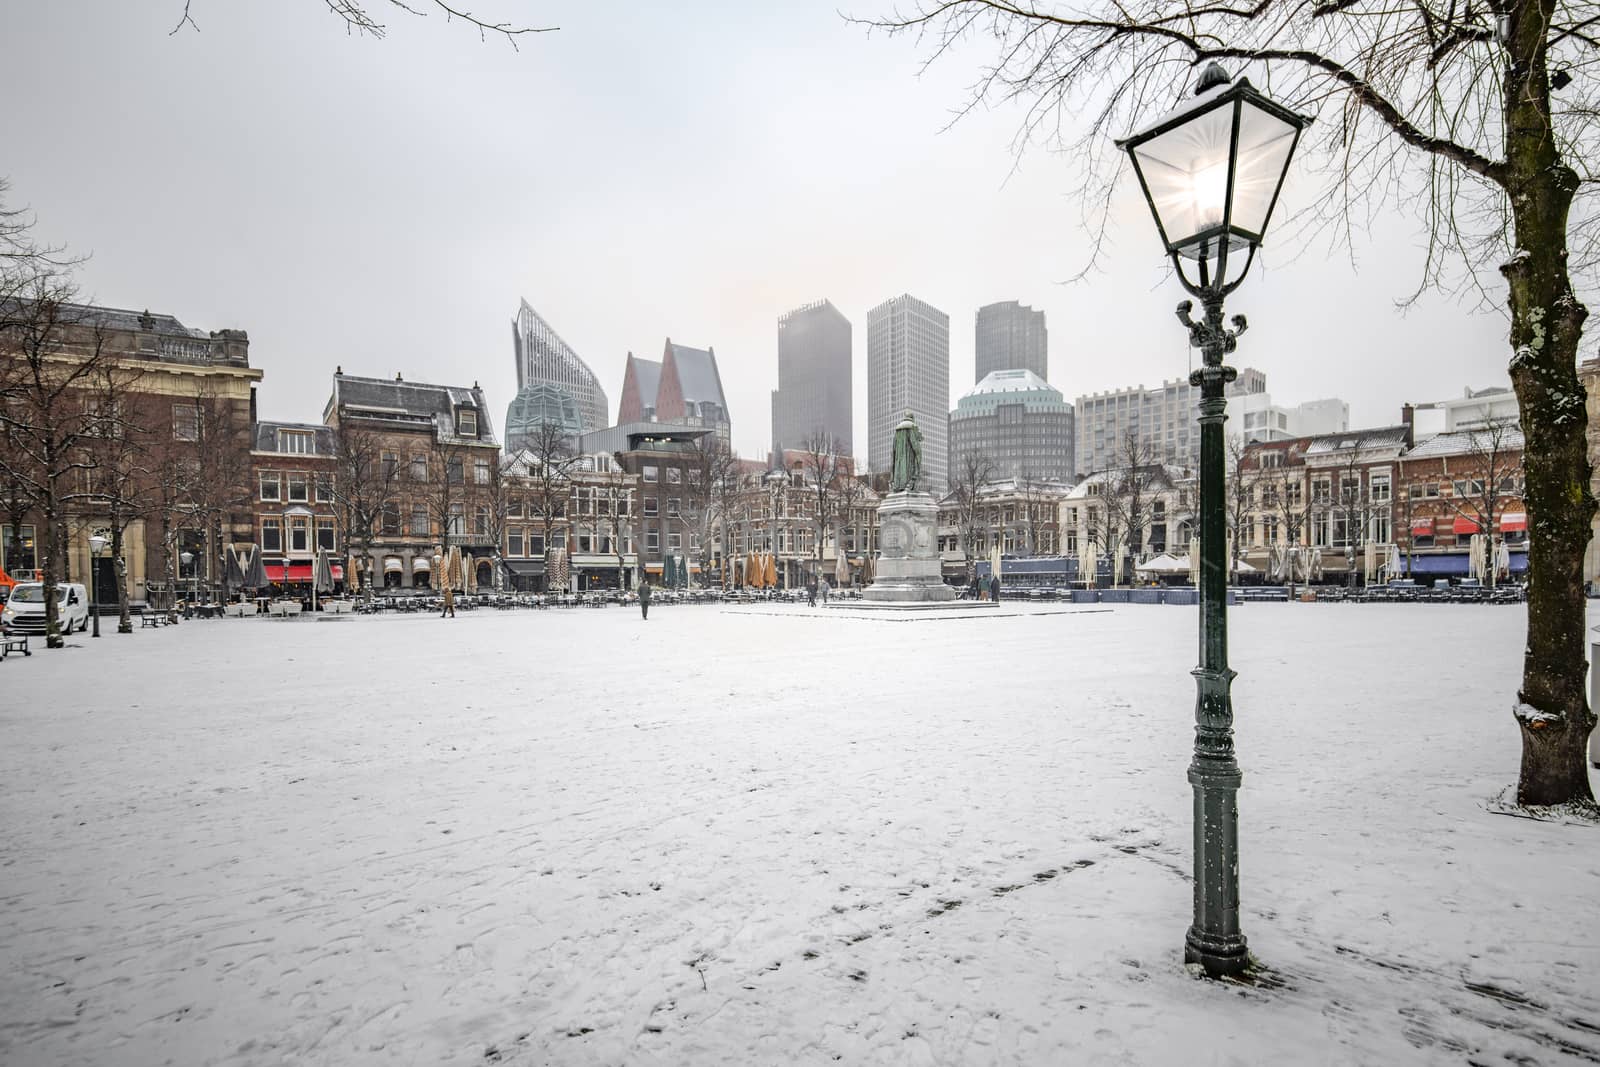 THE HAGUE, 22 January 2019 -  Snow on the central place, Spui in Dutch, usually crowded with people getting diner and drink during the sunset and warm autumn weather in The Hague, Netherlands by ankorlight